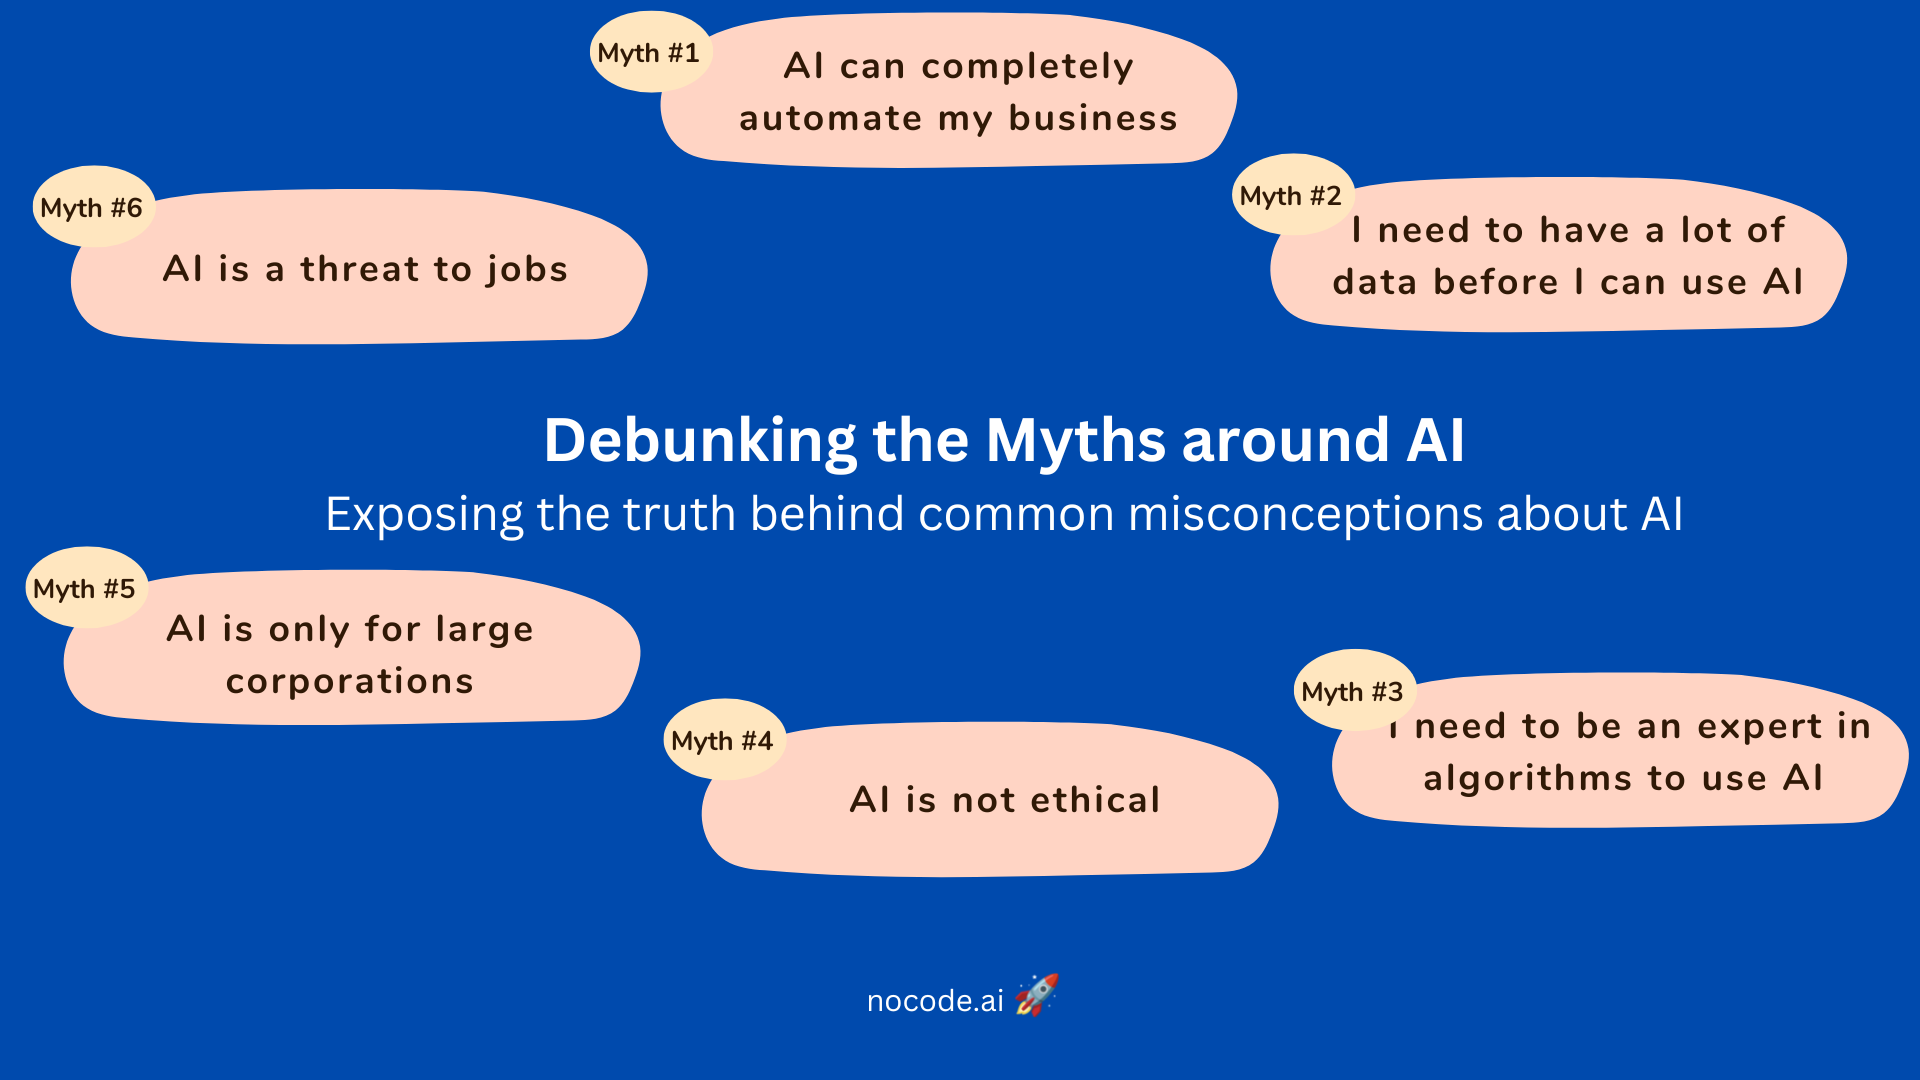 Don't let the myths hold you back. Get the facts and see how AI can transform your business.